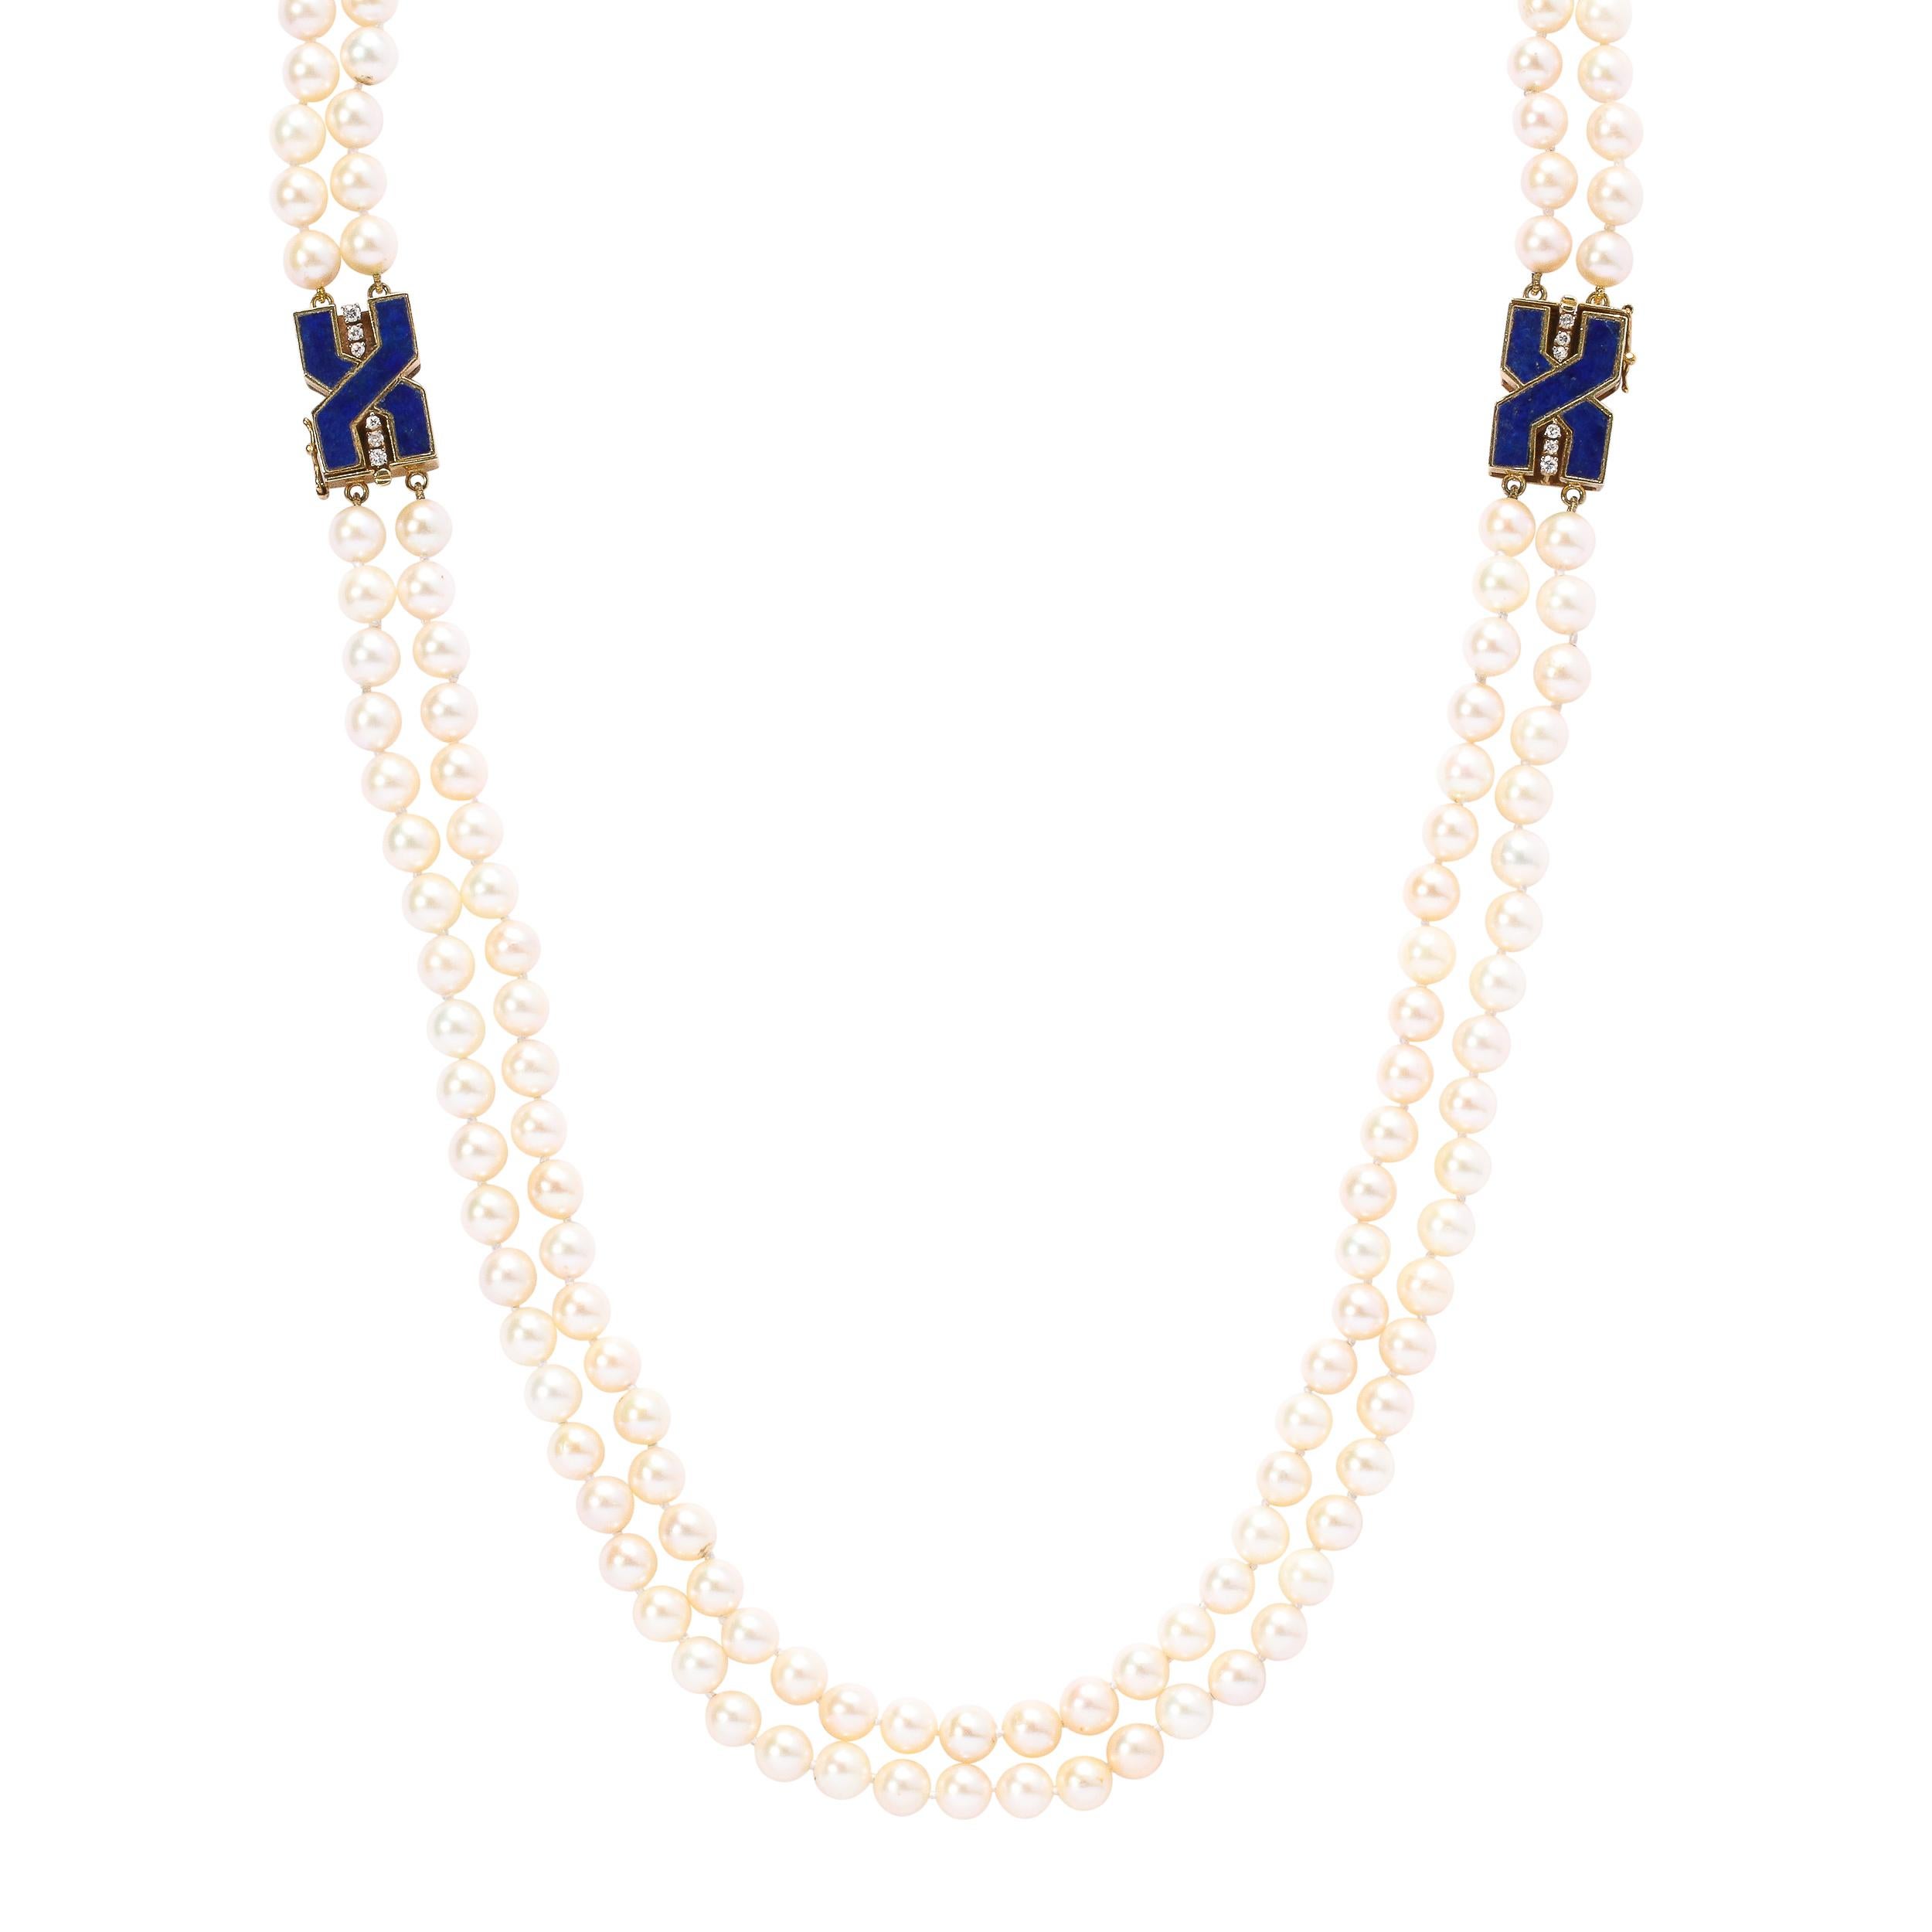 These very chic double strand pearls are a fine creamy rose luster and are approximately 7 mm and have 188 pearls joined by two 18k yellow gold clasps set with lapis and 6 round cut diamonds each. They feature a bold modernist geometric design very